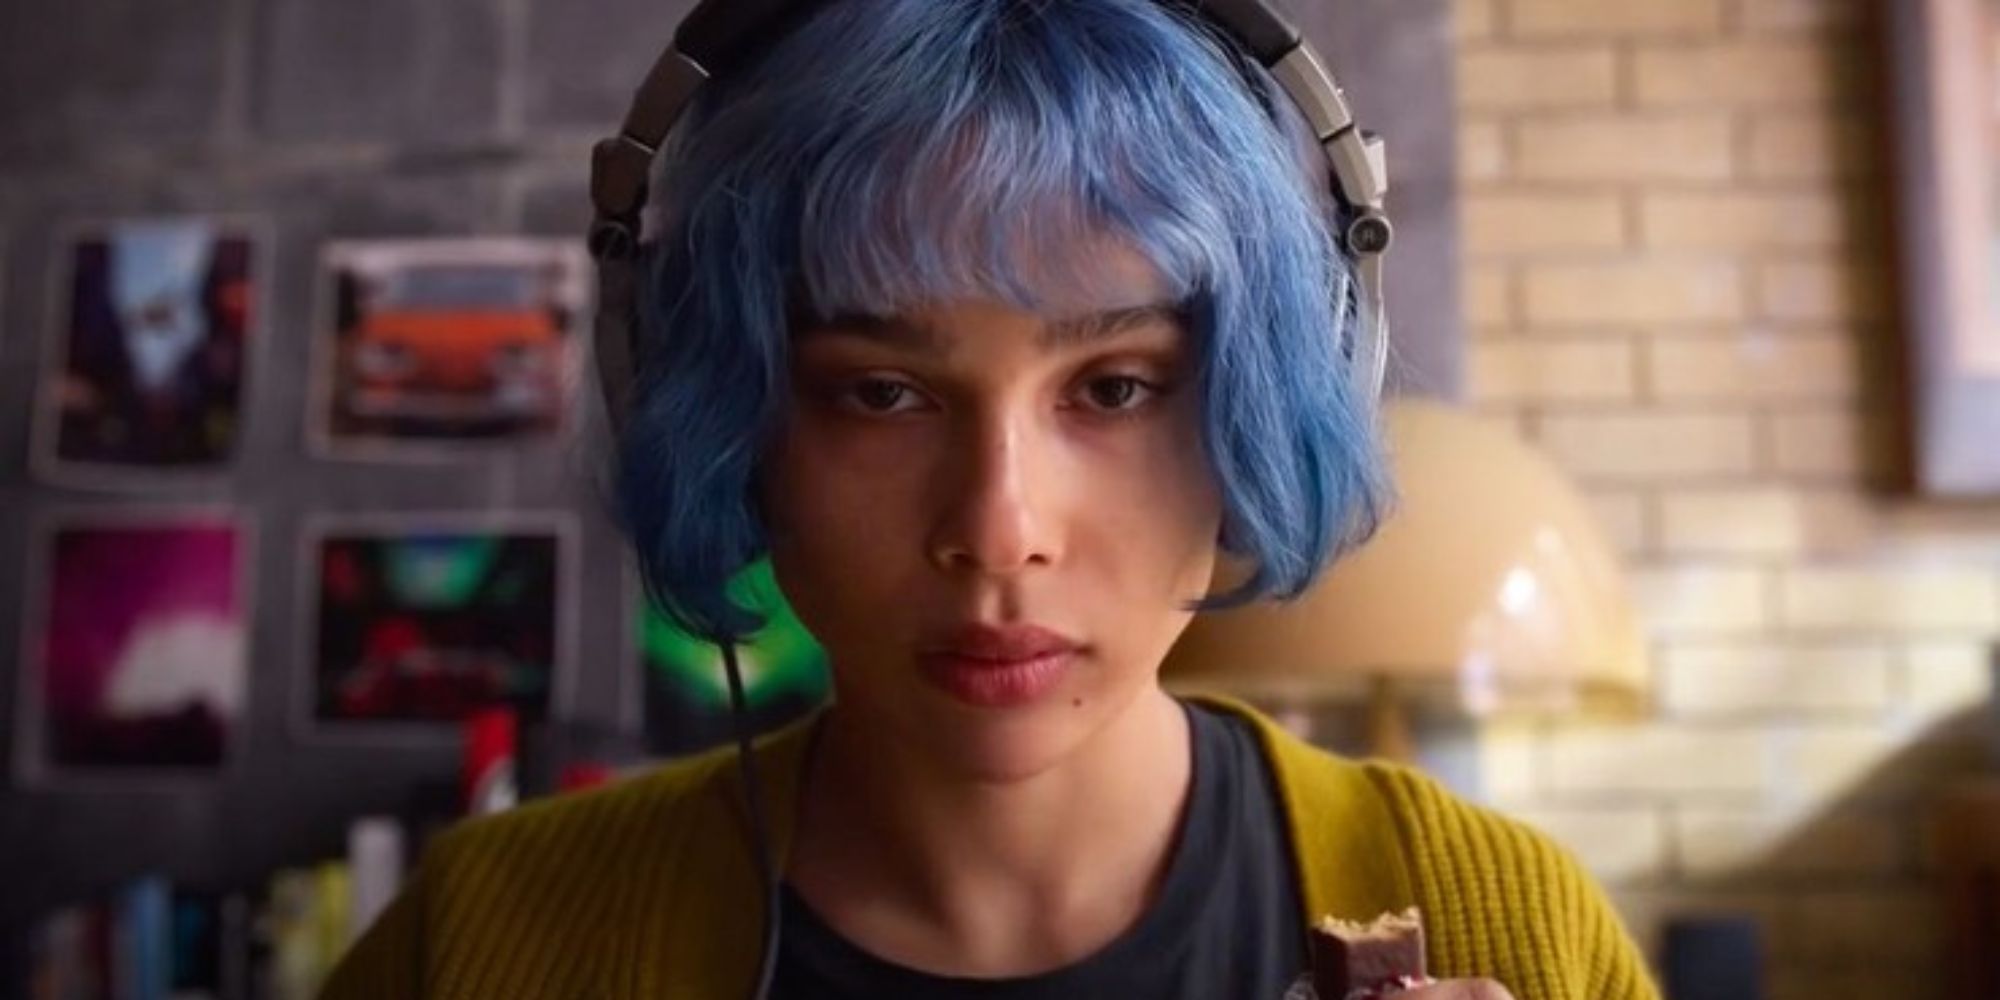 A blue haired mixed race woman is looking at the camera